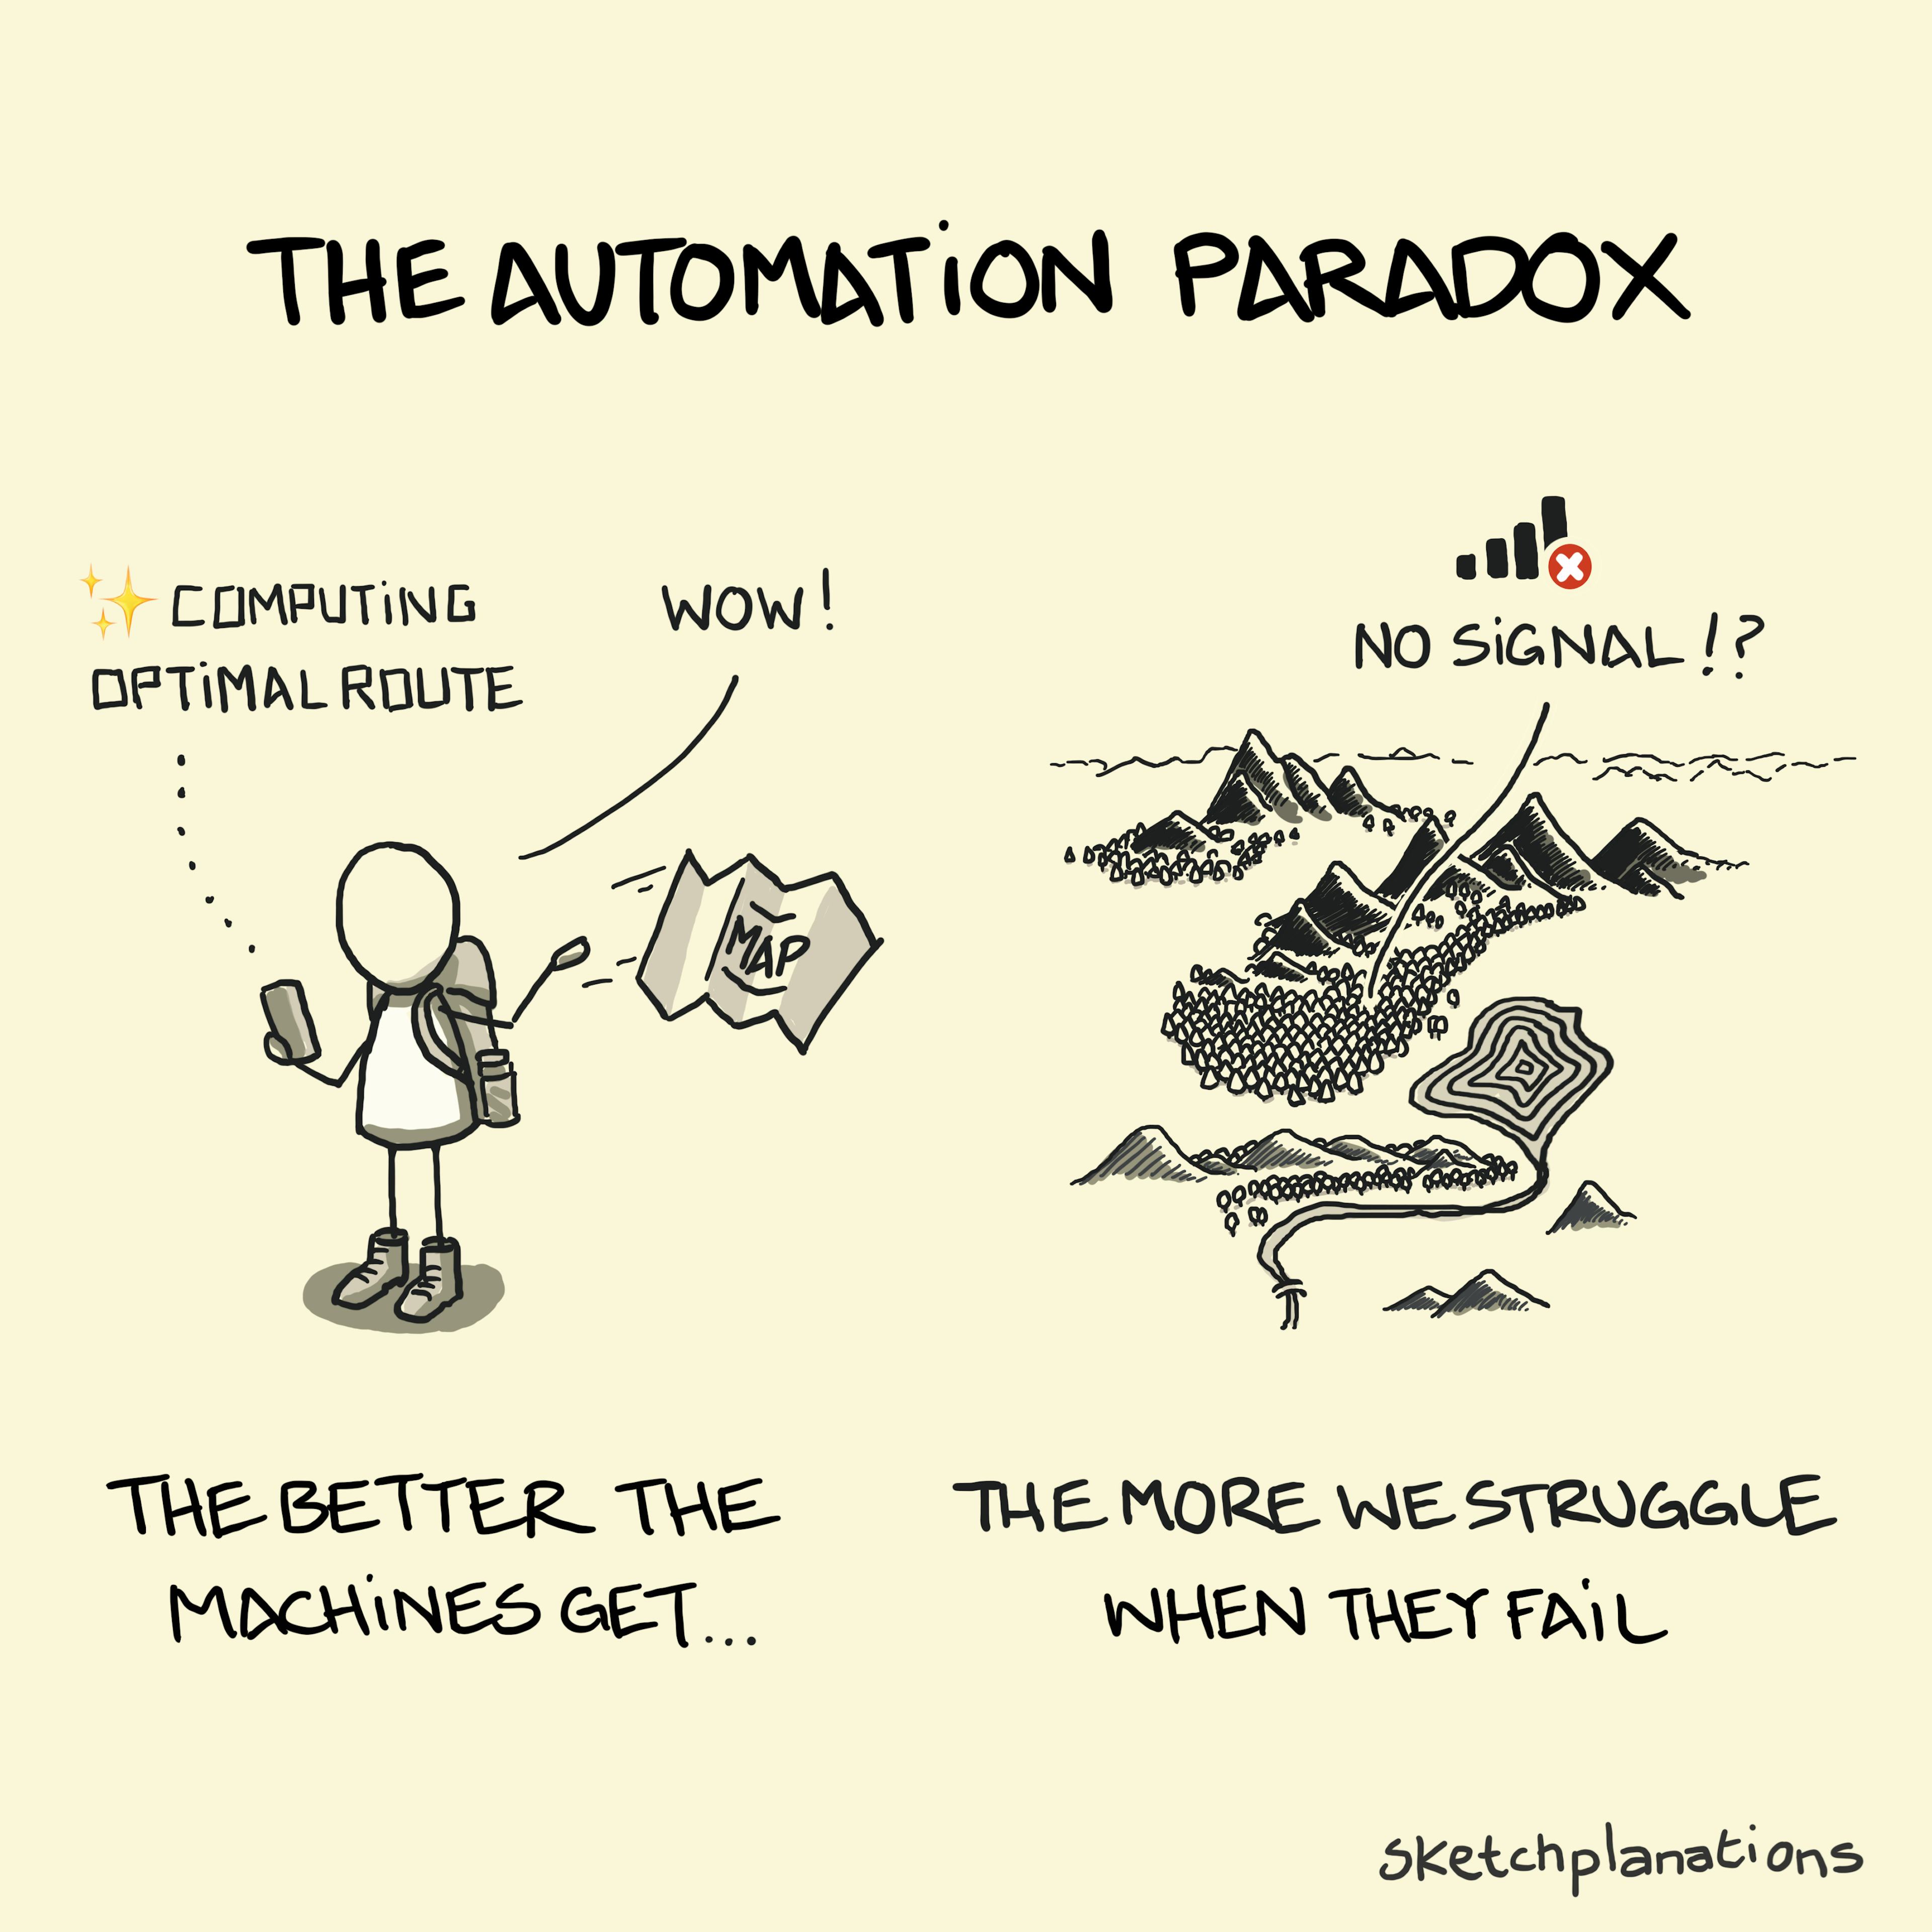 The automation paradox explanation, or paradox of automation, summary with a hiker choosing their phone in place of a physical map and then getting lost in a landscape when there's no signal